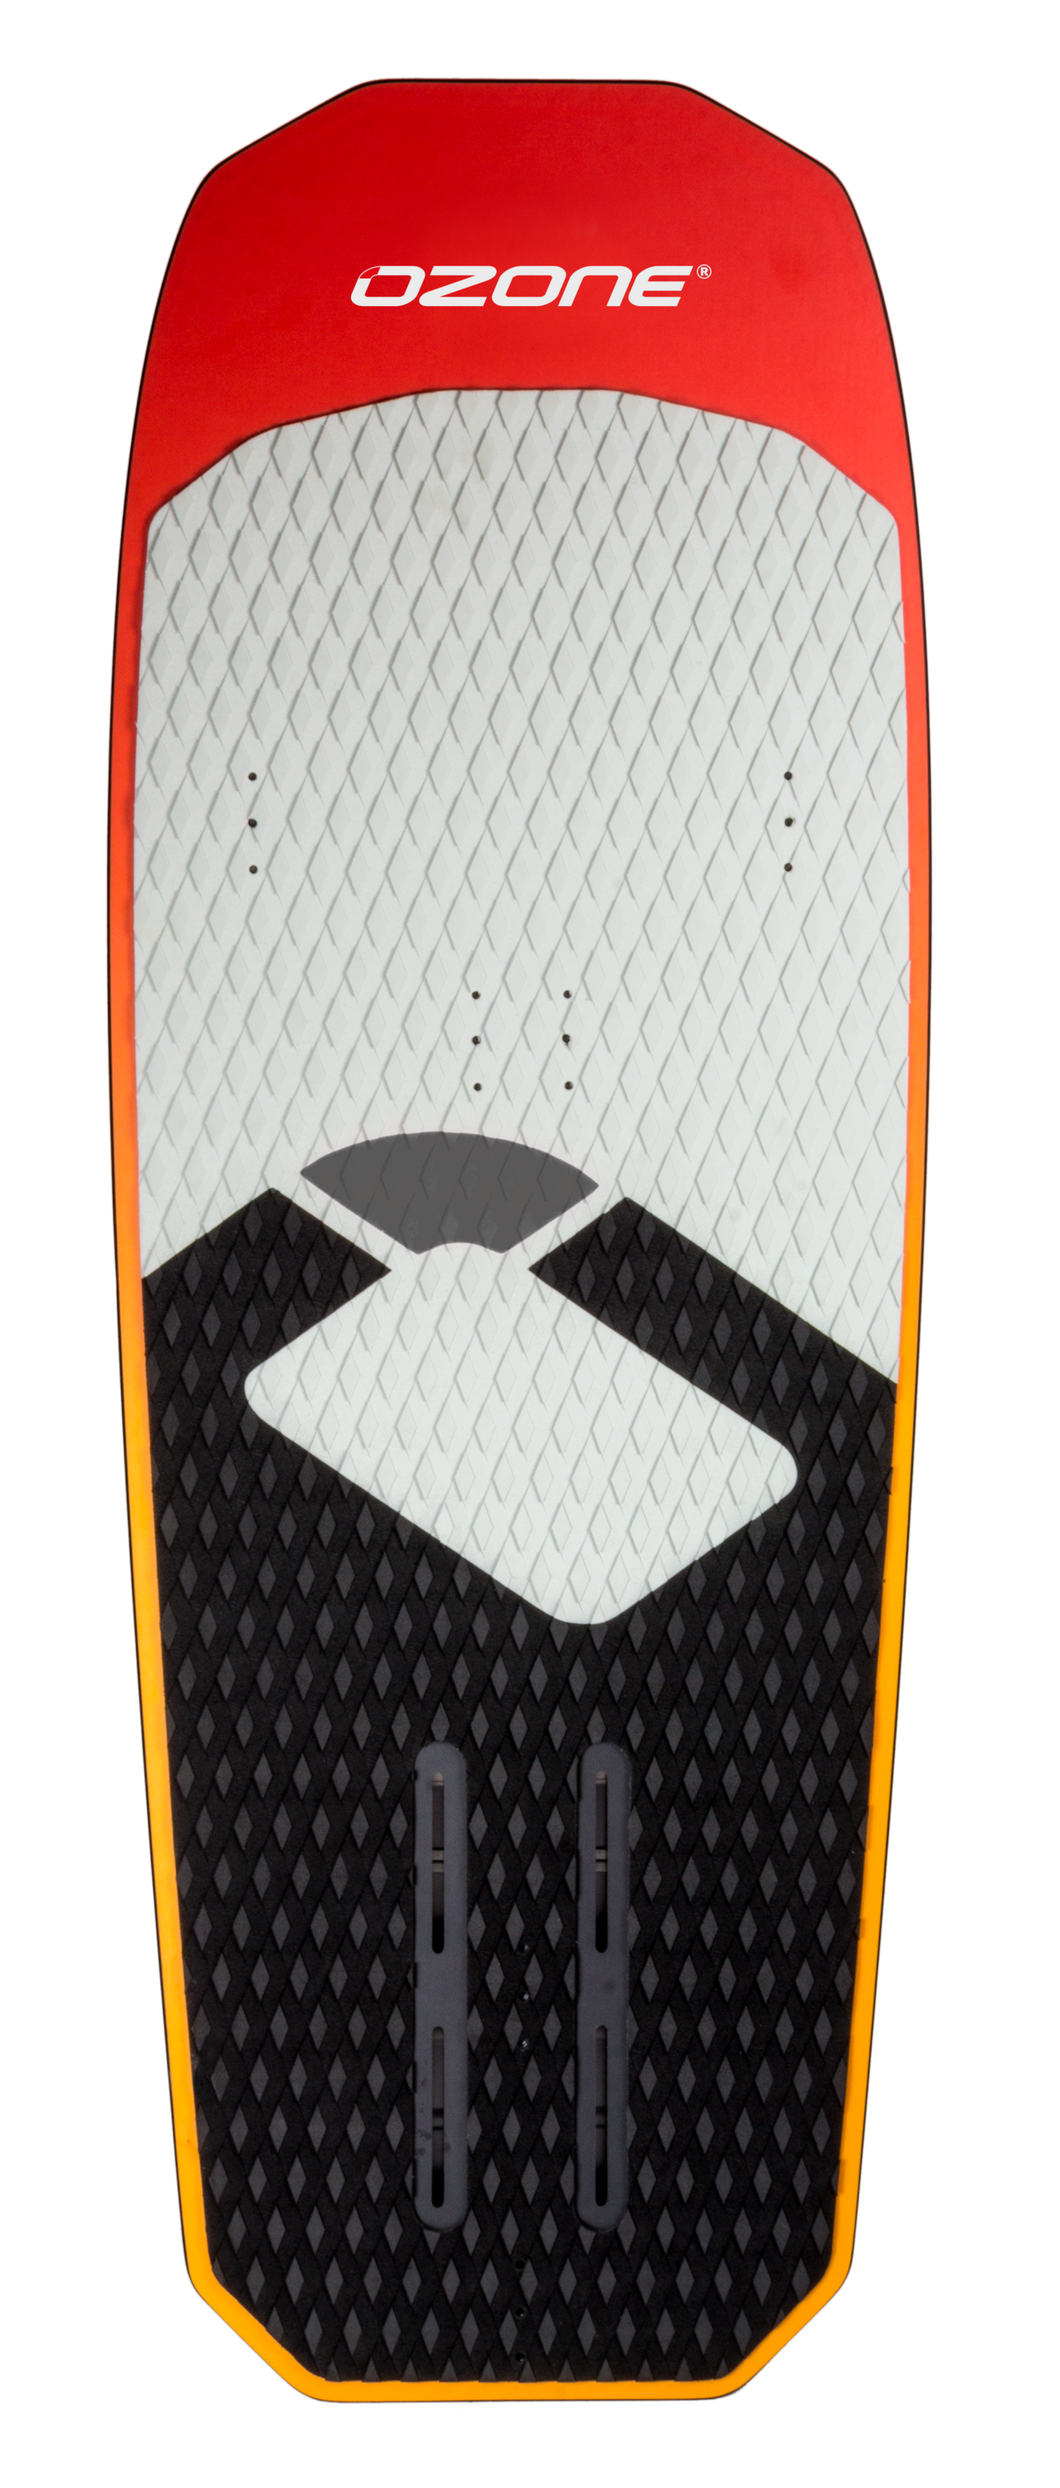 Ozonekites APEX V1 Hidrofoil Board strong light and fun, made with americans cup technology Kingzspot